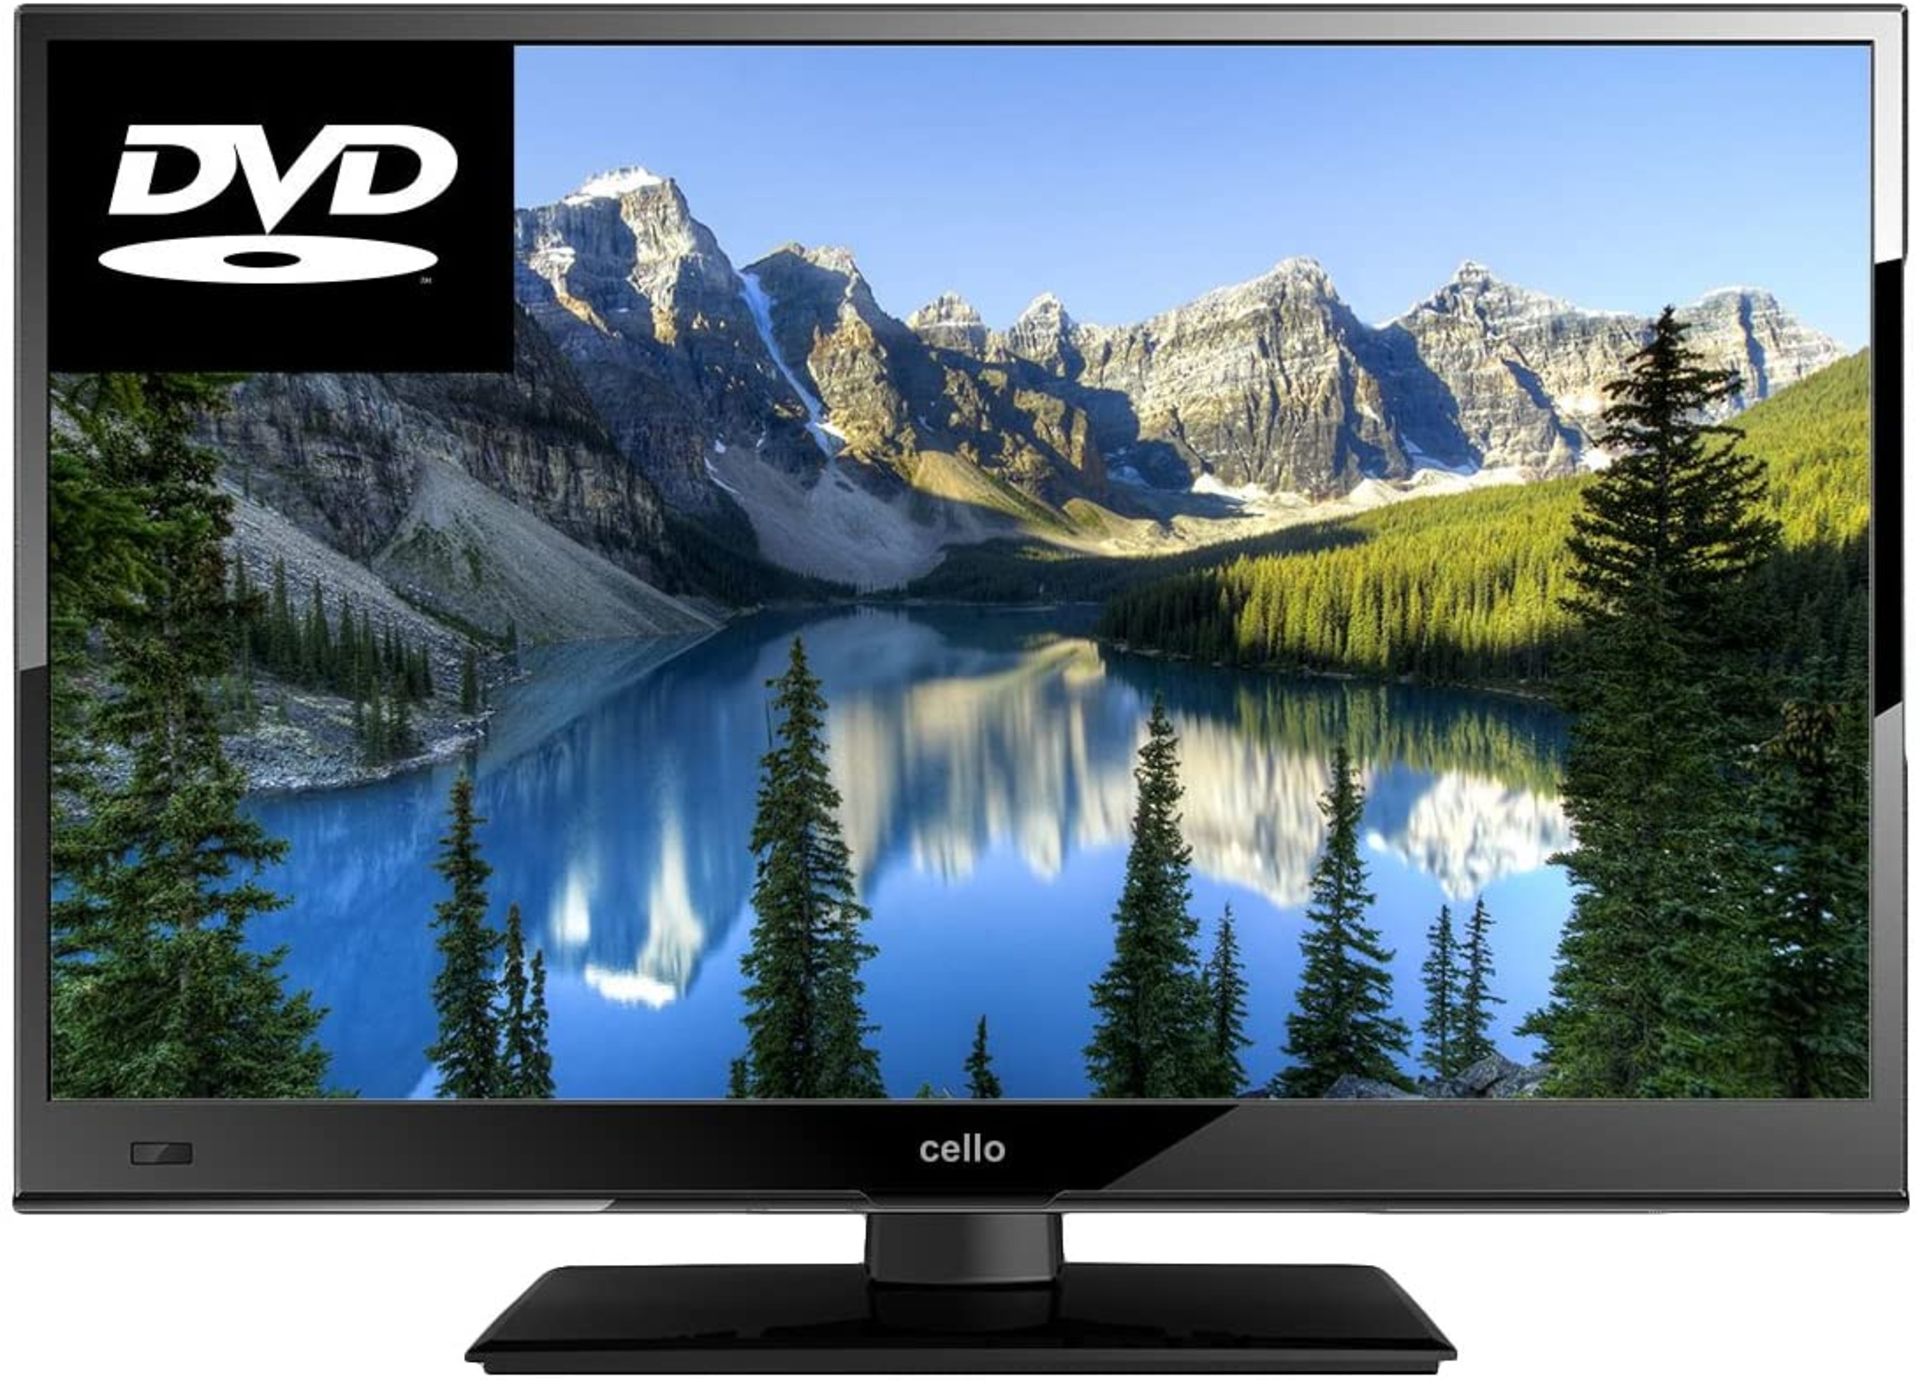 (27) 1 x Grade B - Cello C16230F 16 inch Black HD Ready LED TV with DVD Player Built In. (27) 1 x